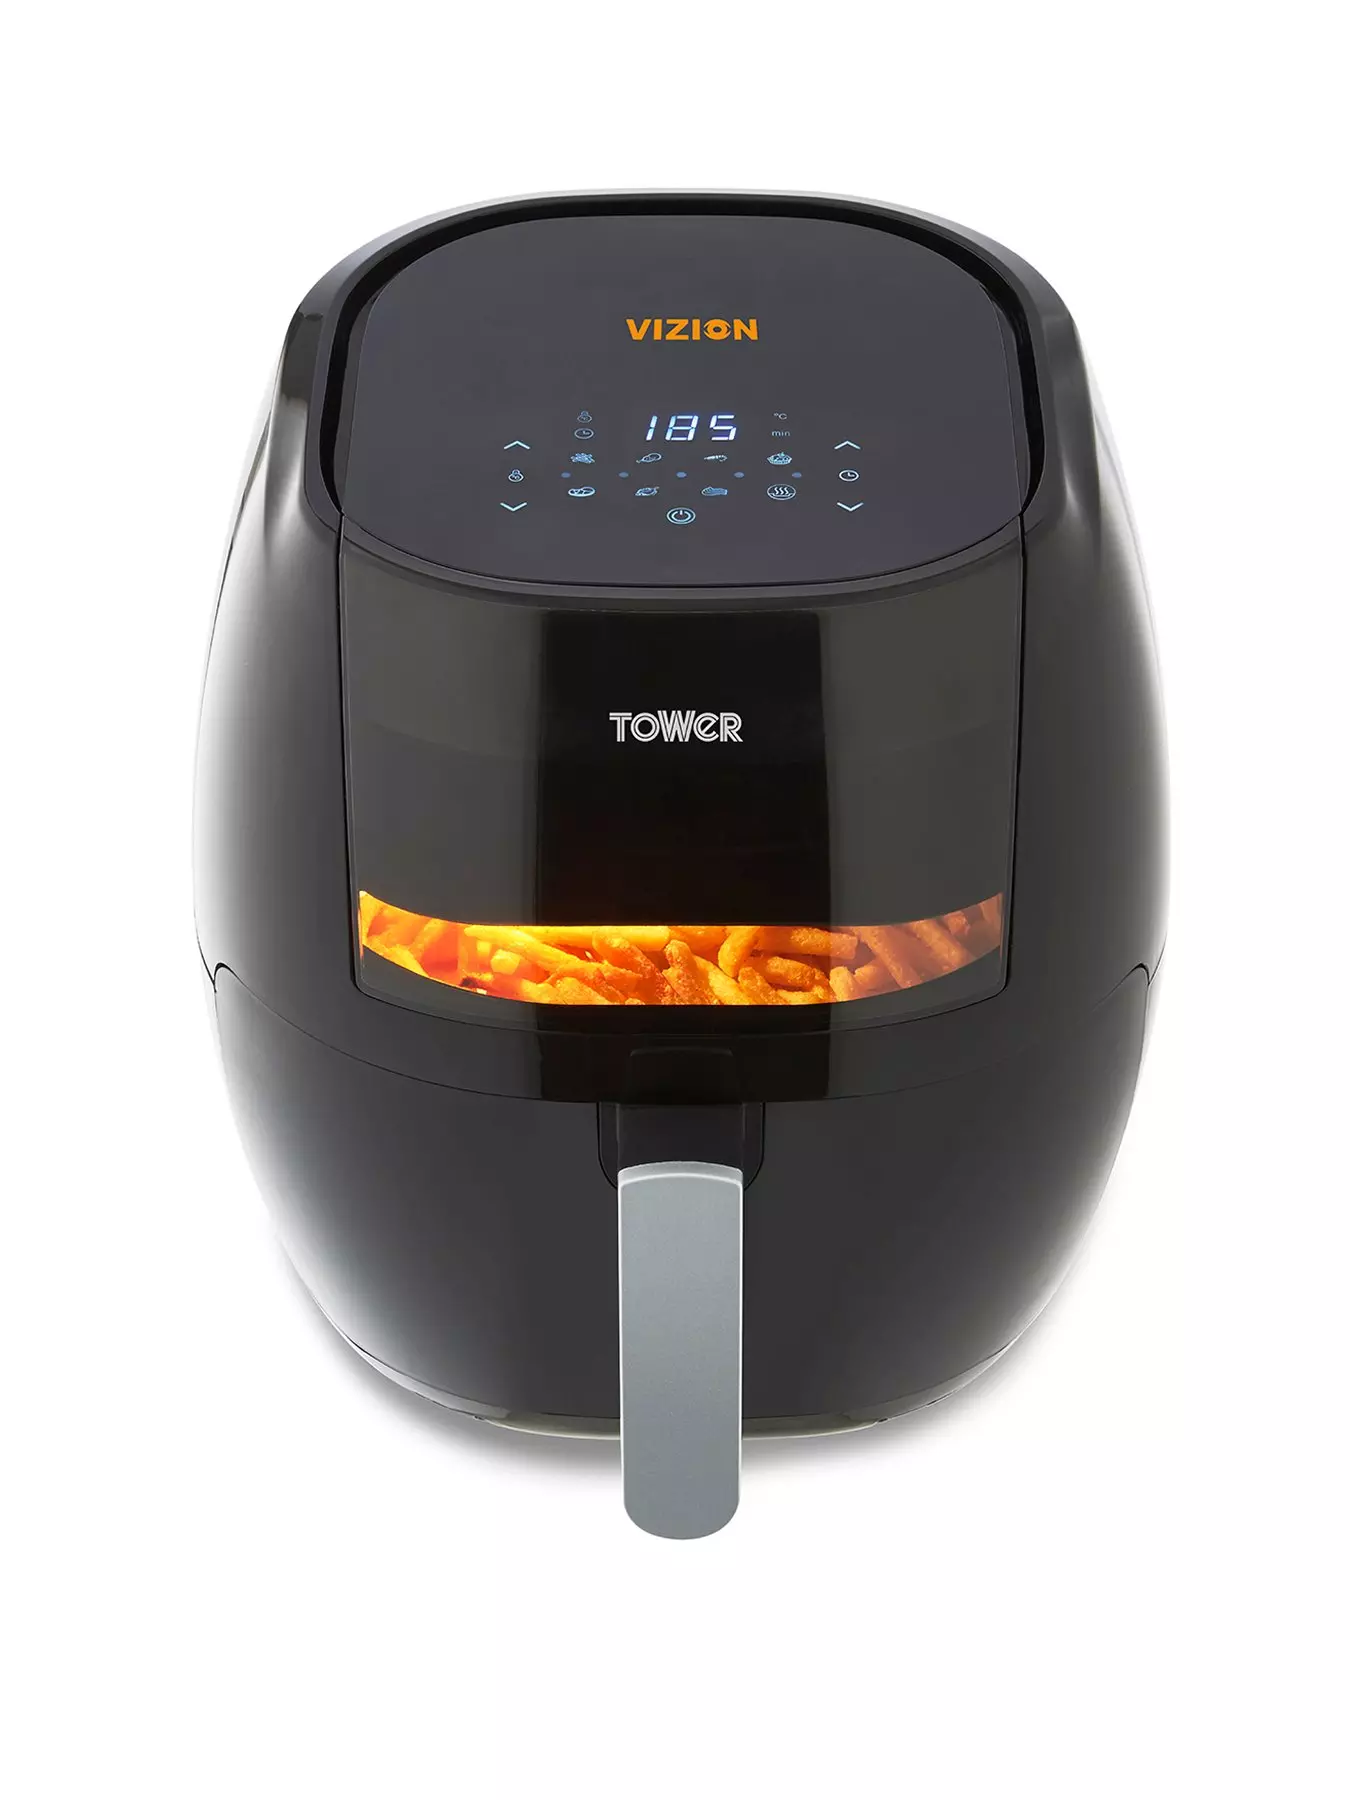 Neo Black Electric 8.5L Digital Air Fryer with Dual Drawer and Glass  Viewing Window